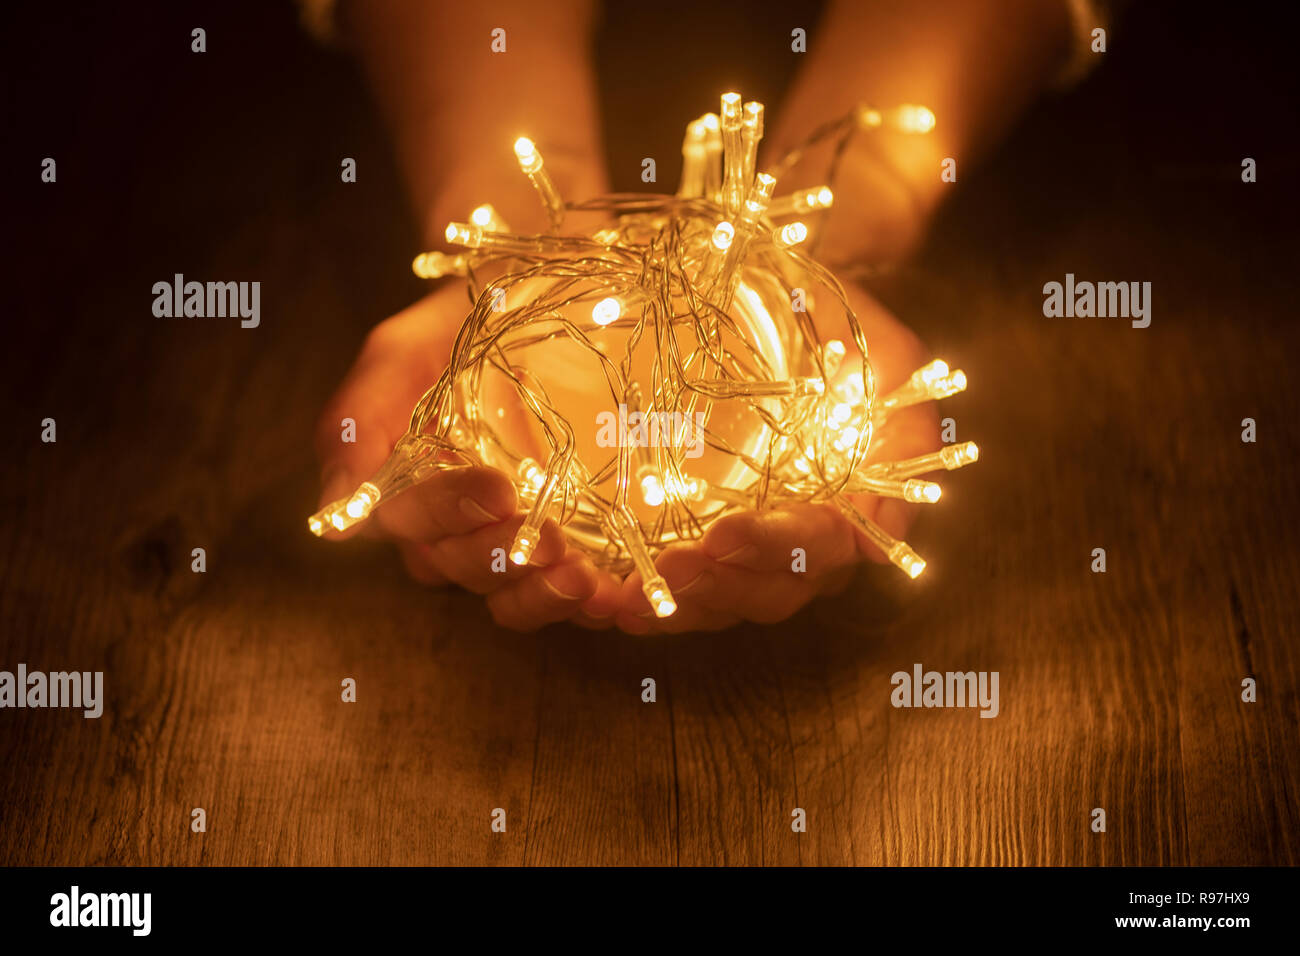 Hands holding a ball of fairy lights Stock Photo